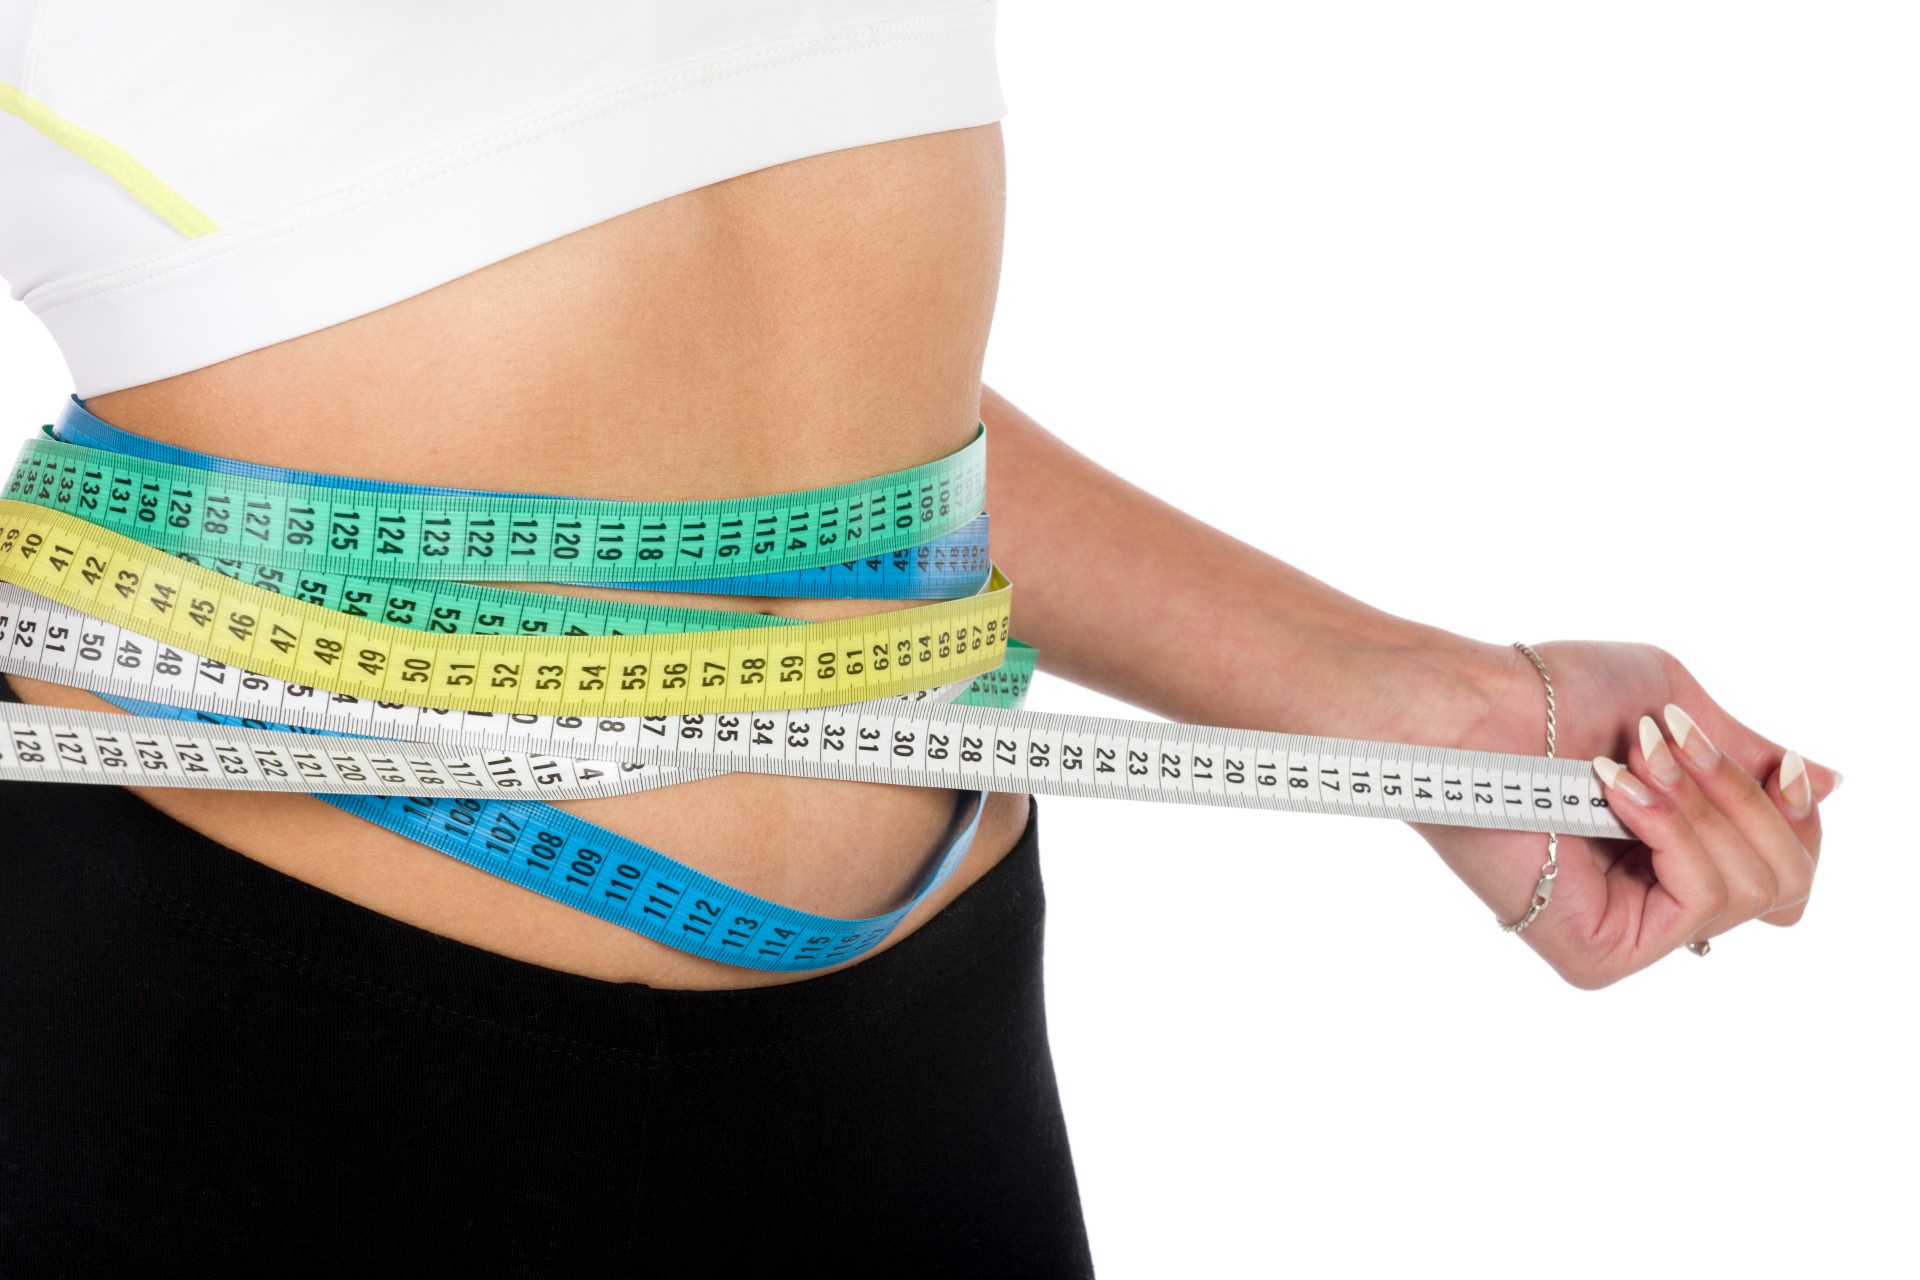 fit-belly-and-tape-measures-girl-weight-loss